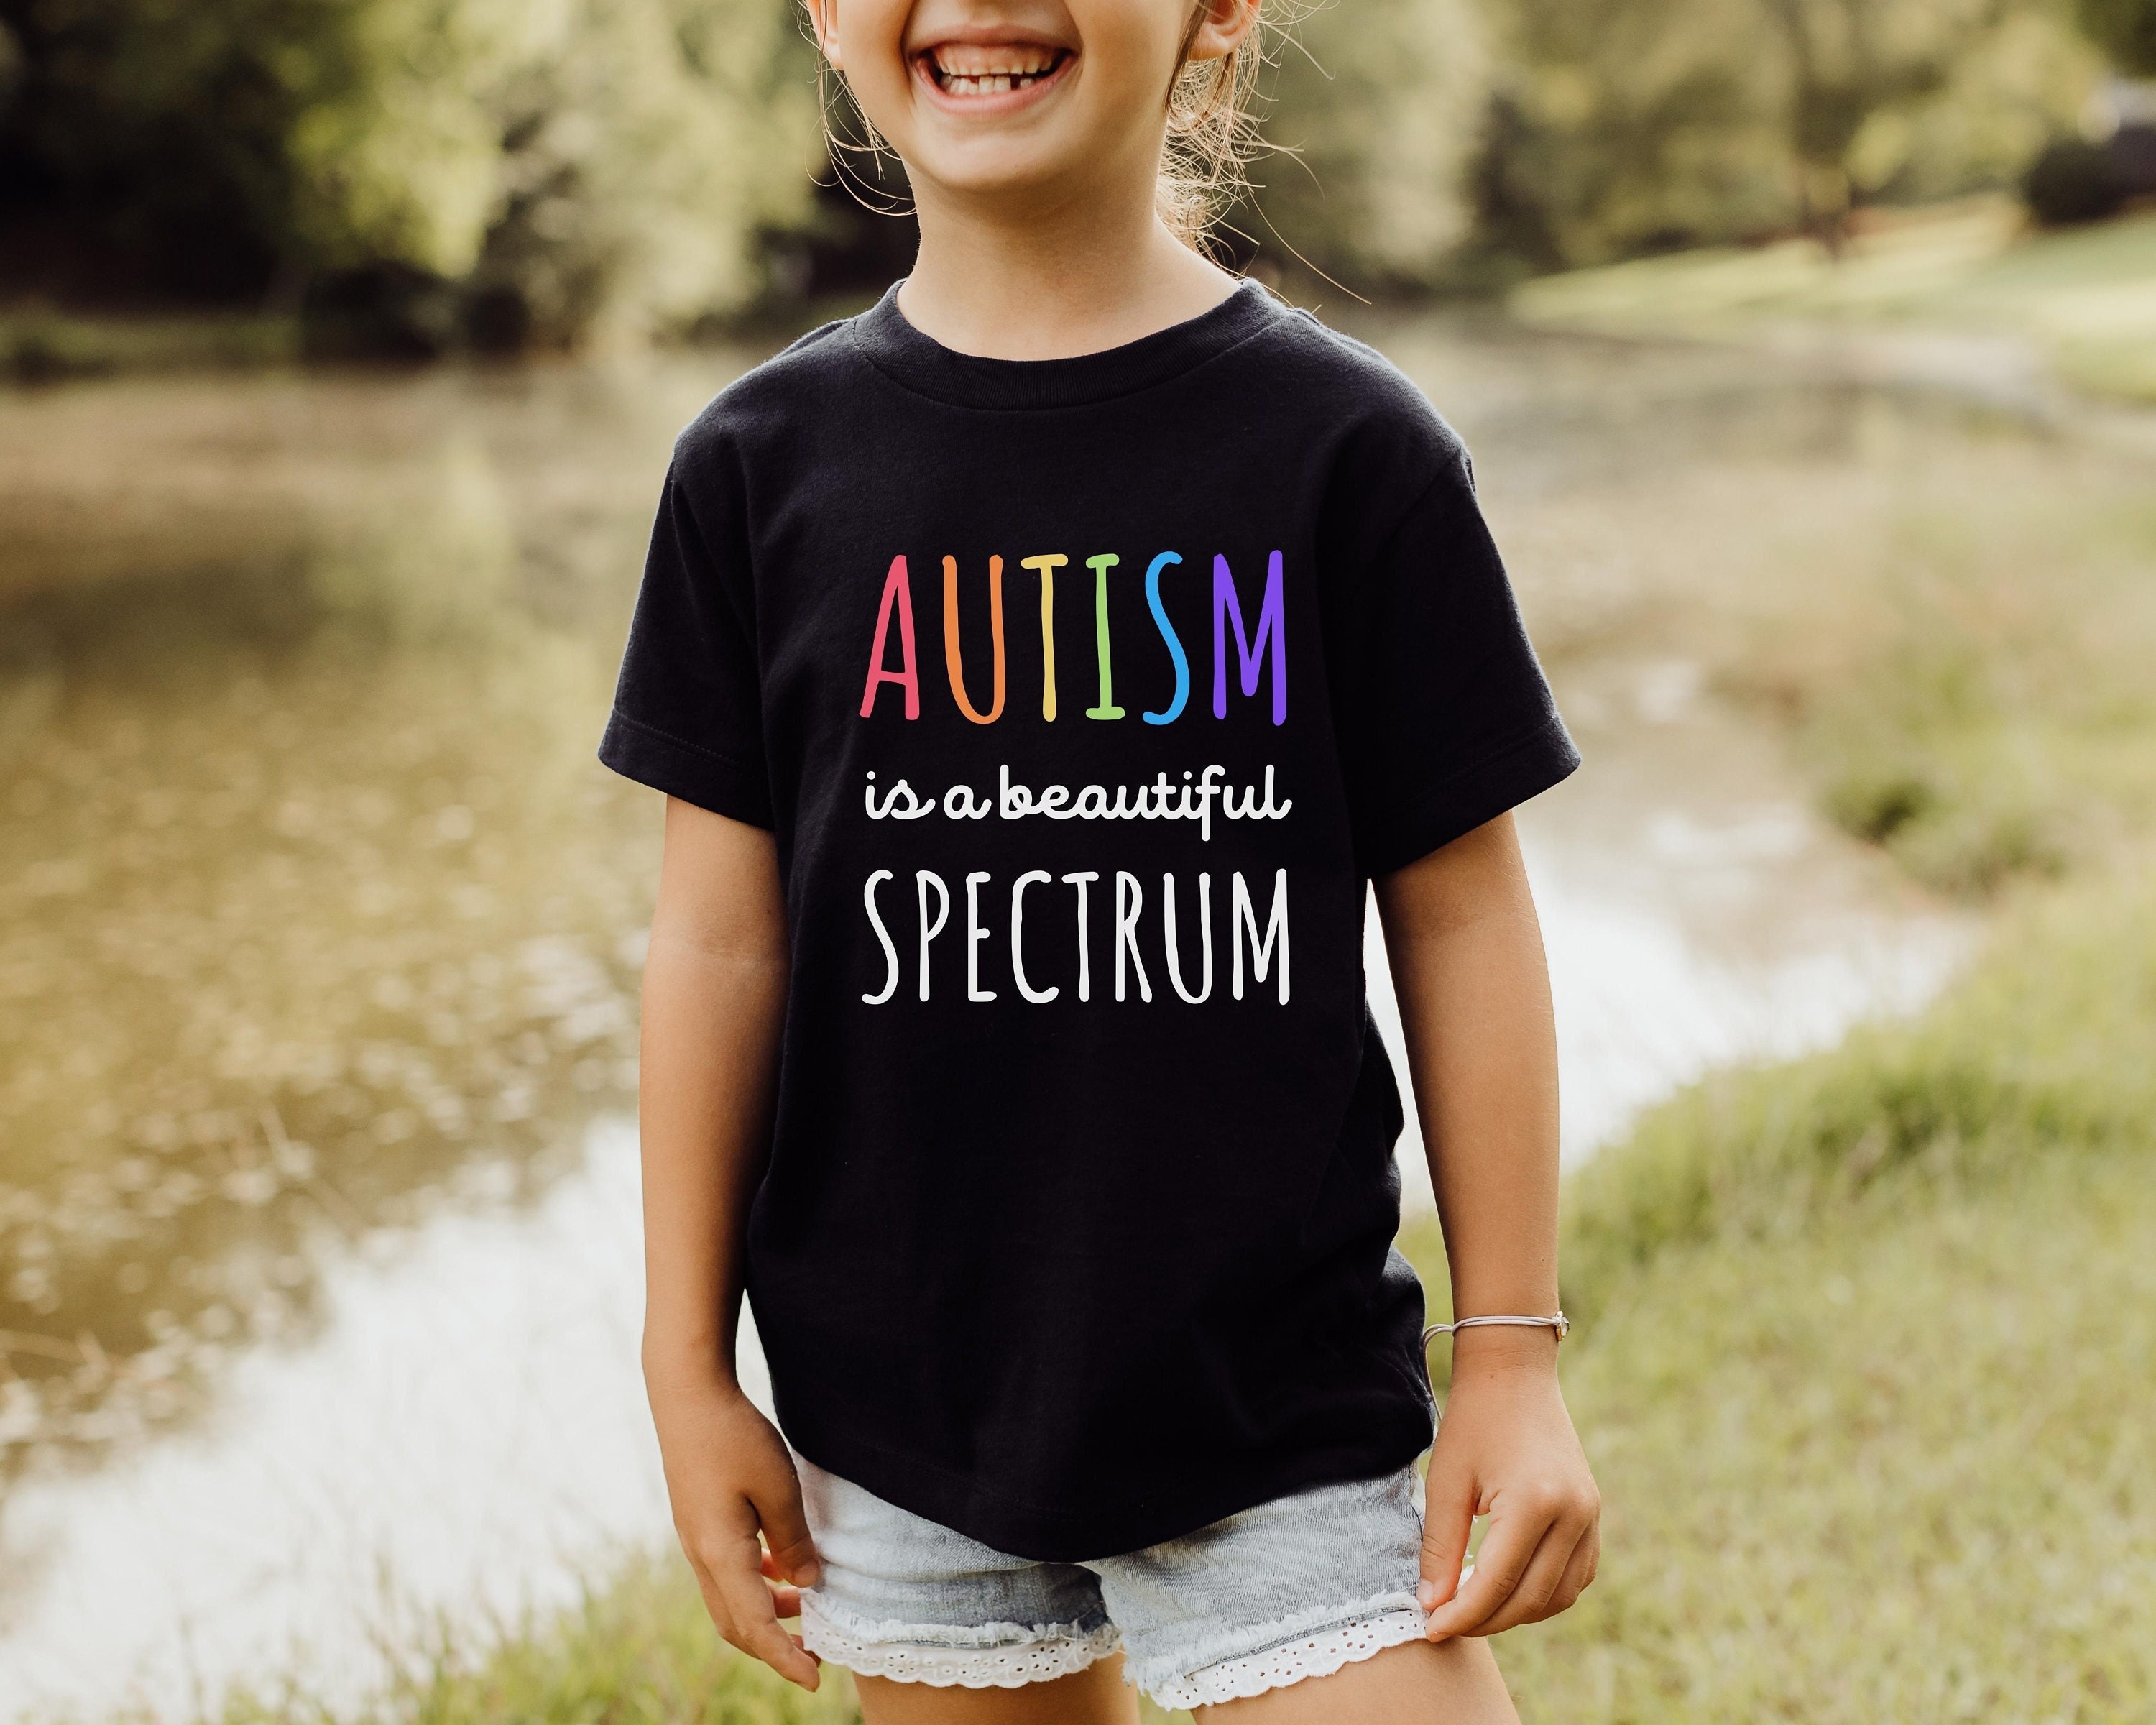 is a Beautiful Spectrum Kids Shirt Shirt for Autistic - Etsy